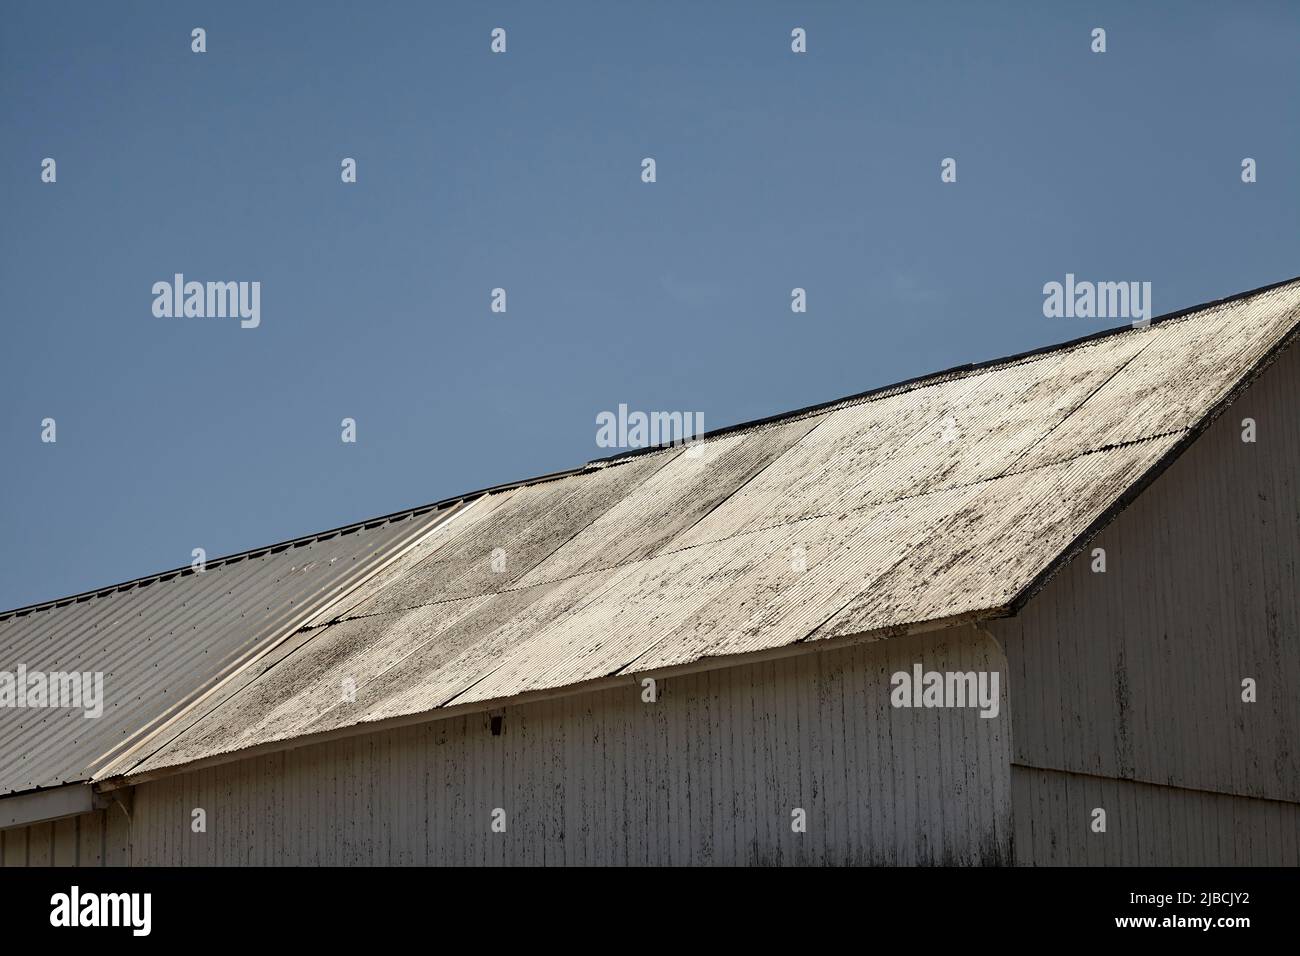 A metal barn roof reflecting in the sun Stock Photo